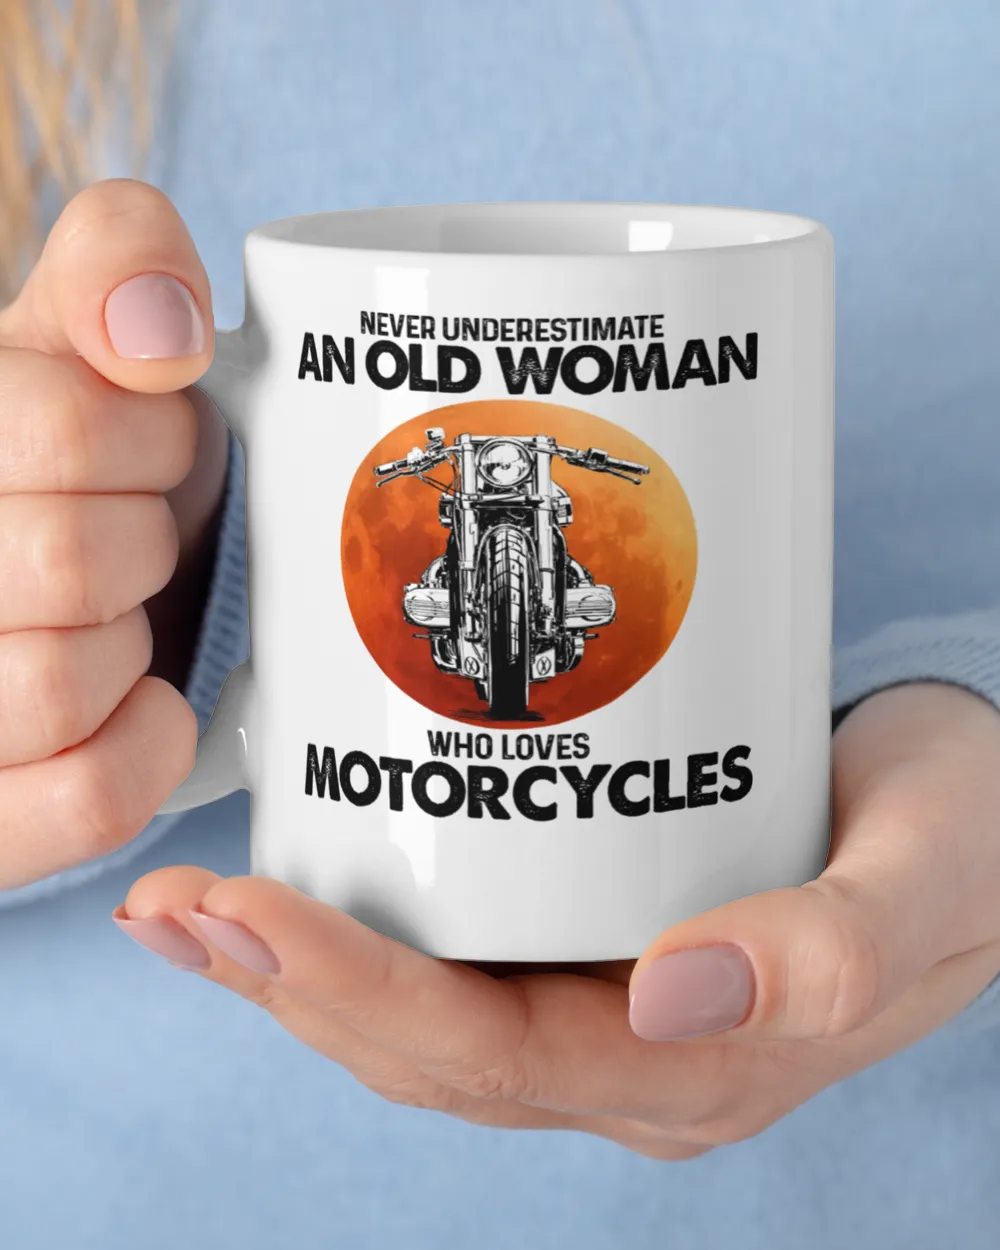 MOTORCYCLES